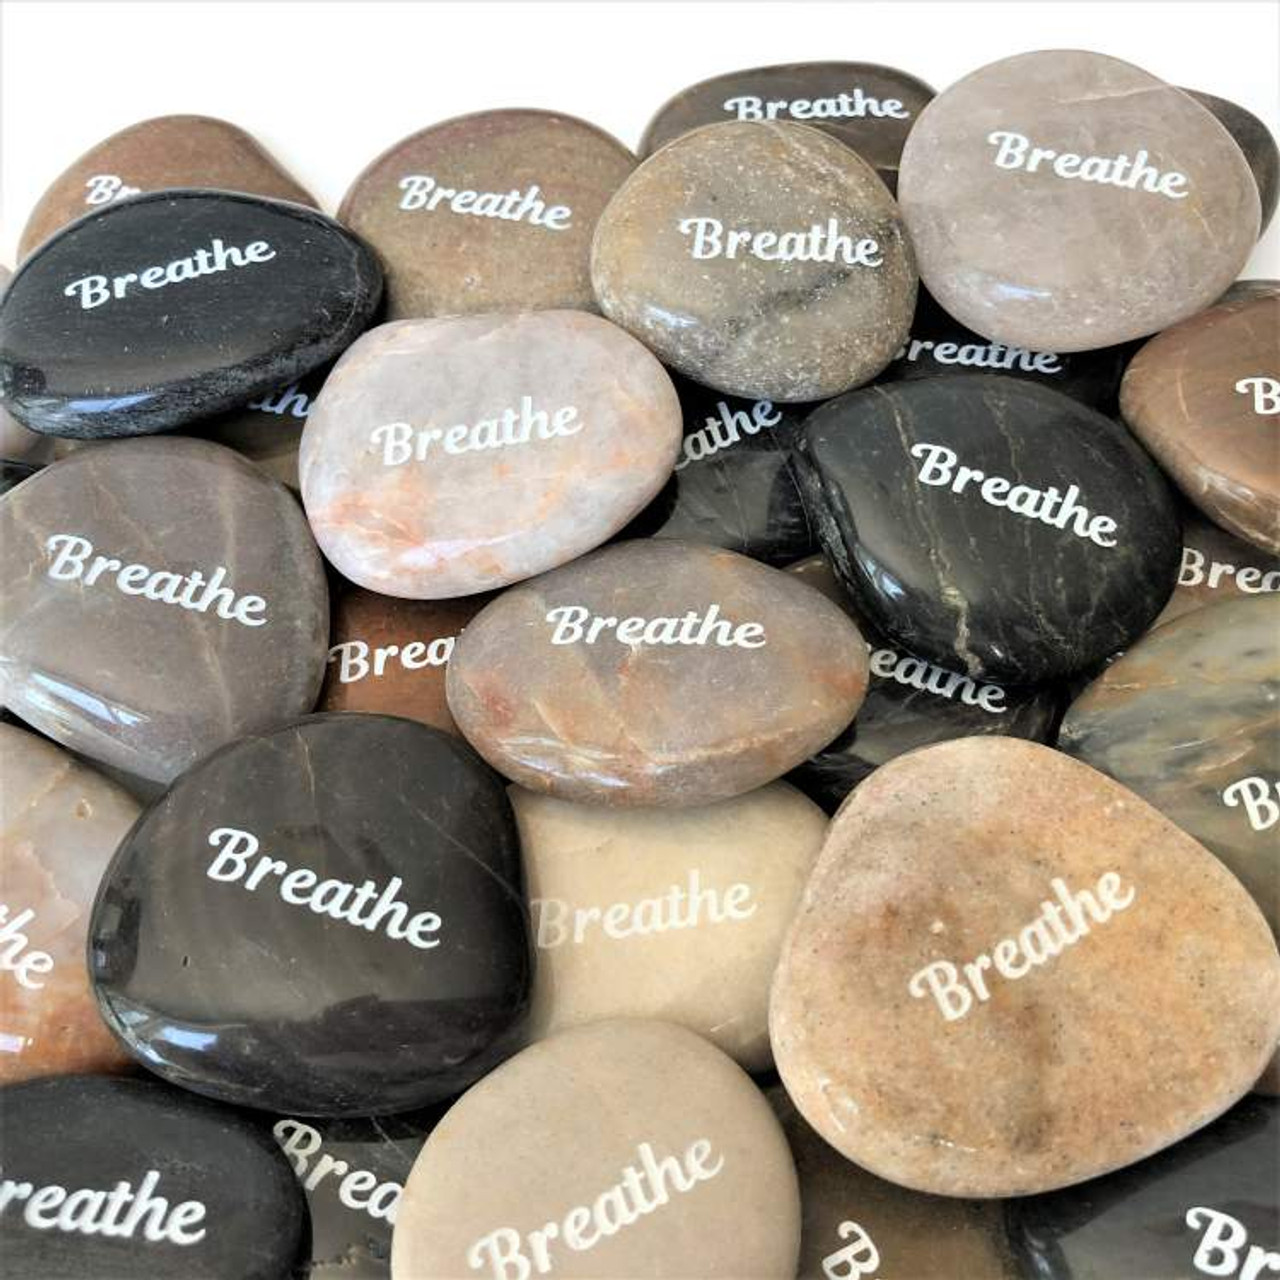 Breathe” Polished River Stones Fit in Your Pocket